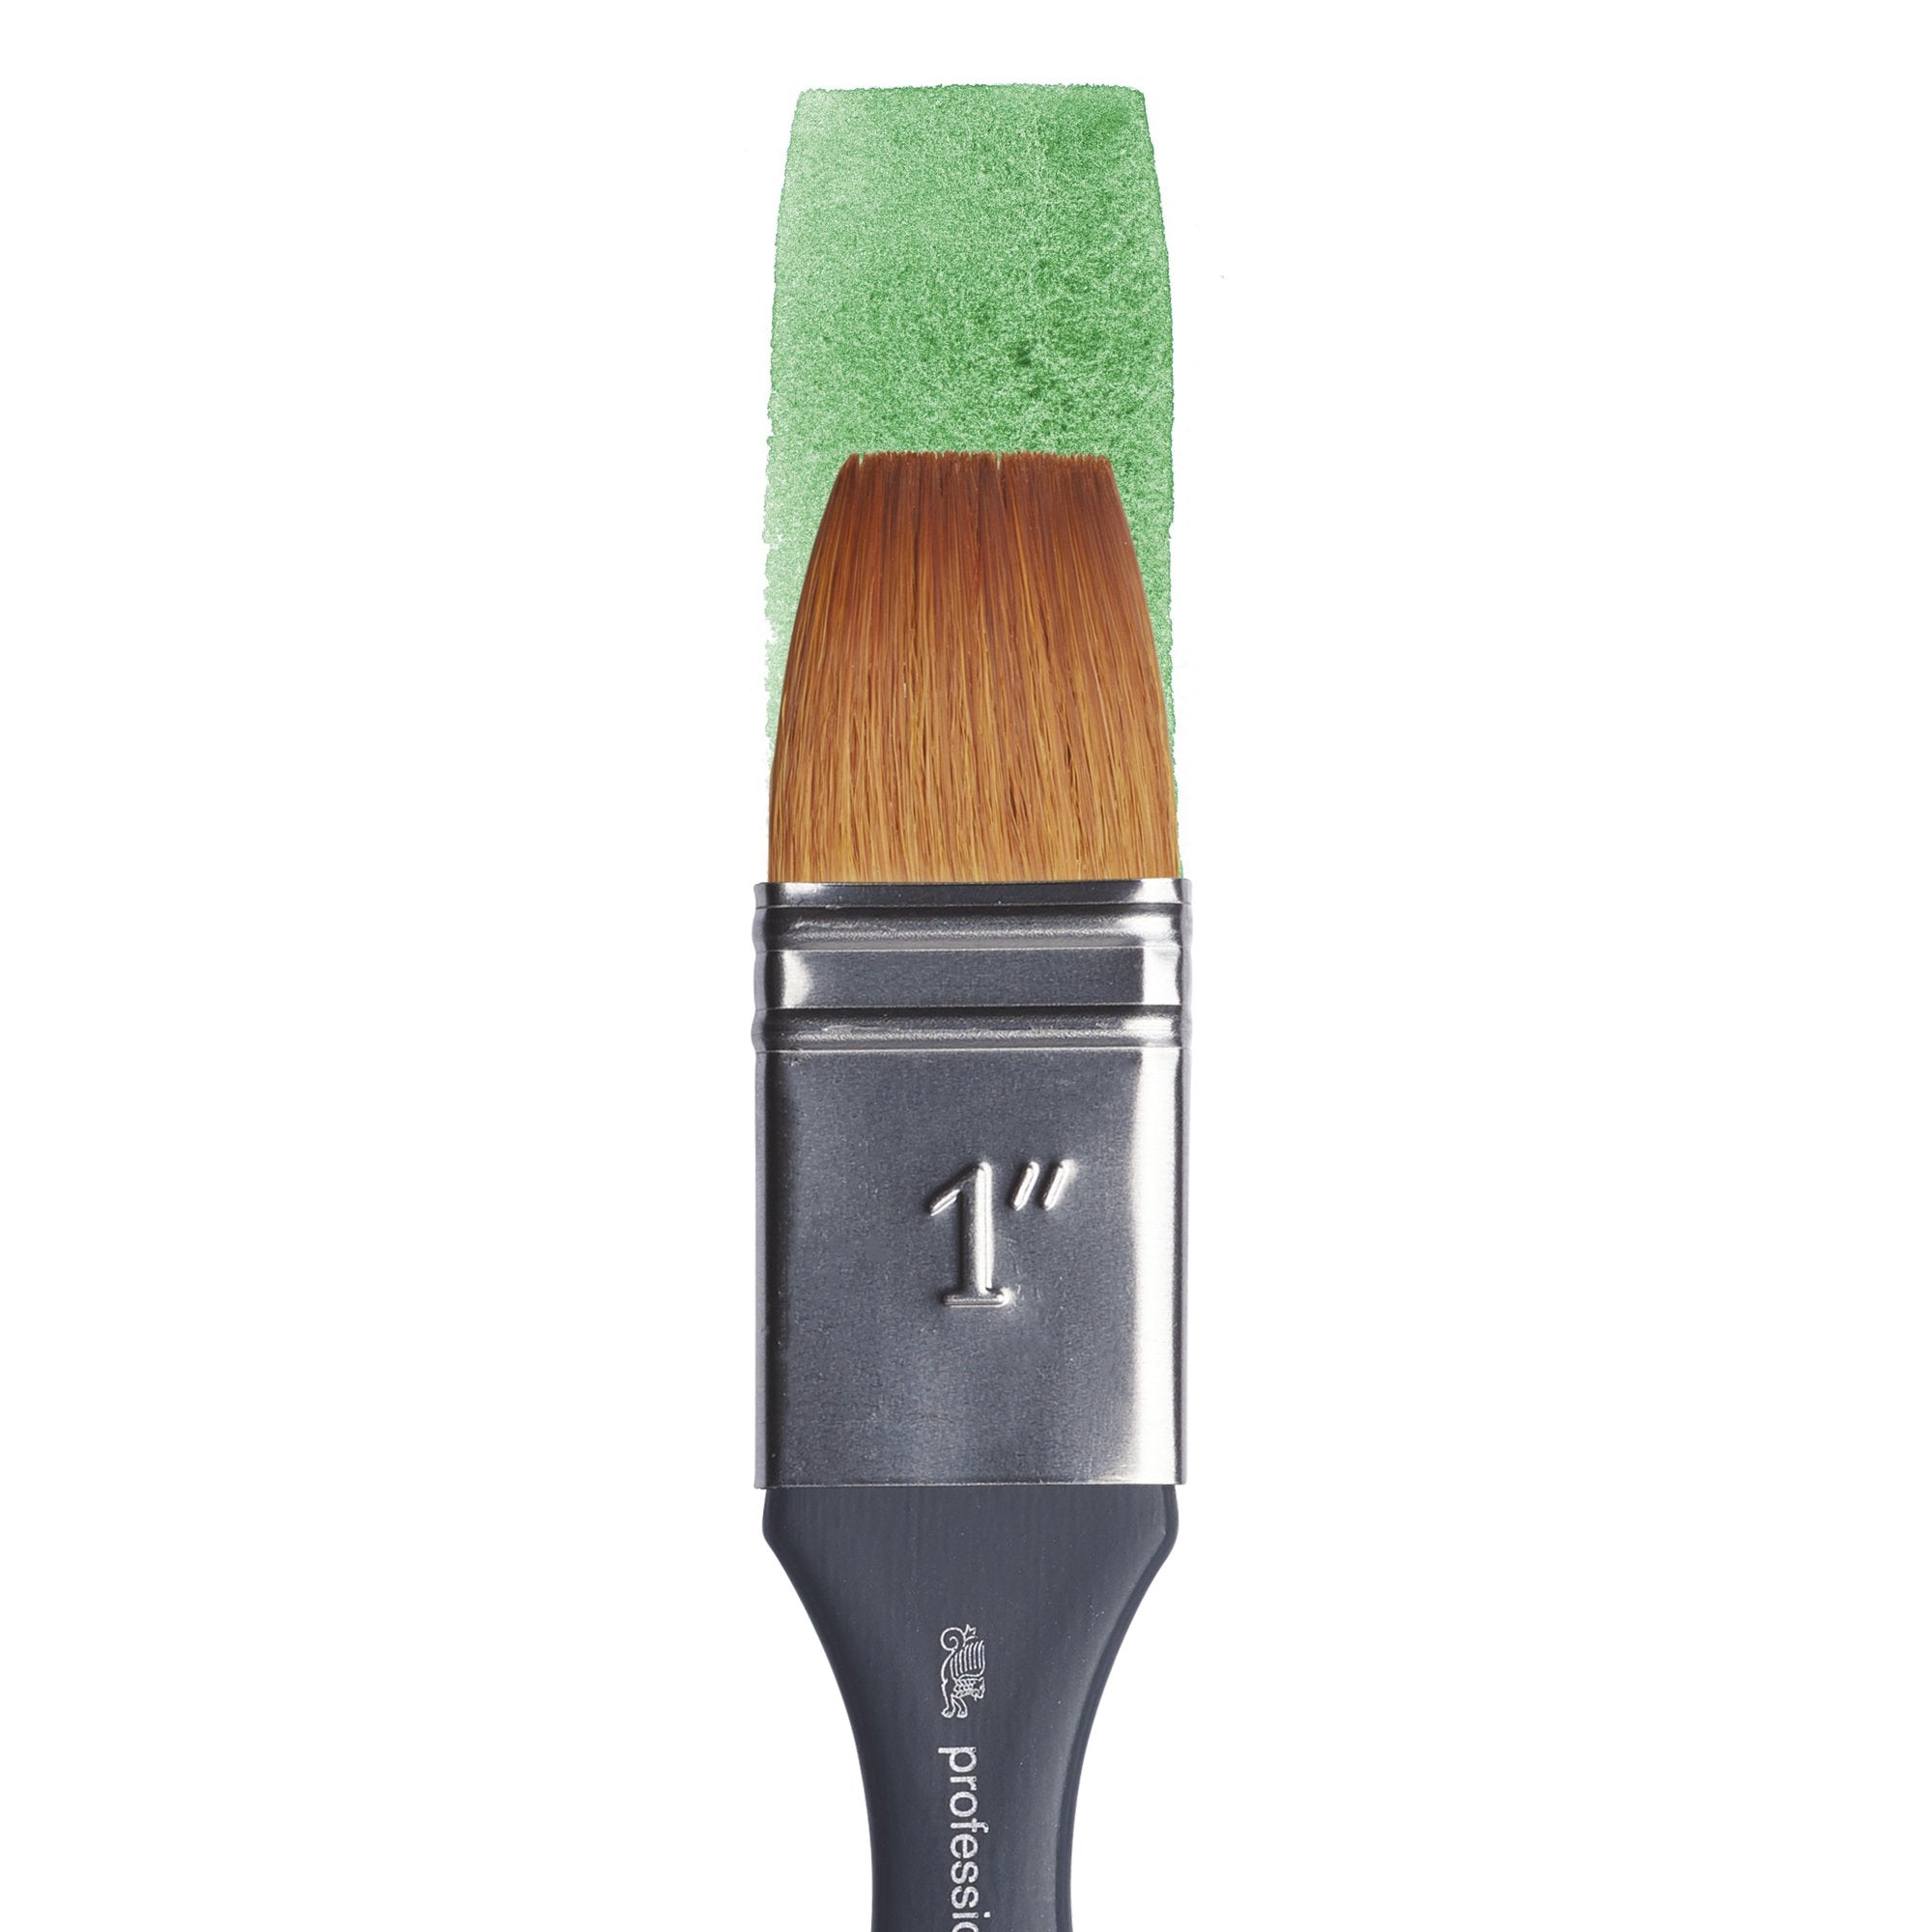 Winsor & Newton Professional Watercolour Synthetic Sable Brush Wash 1 inch